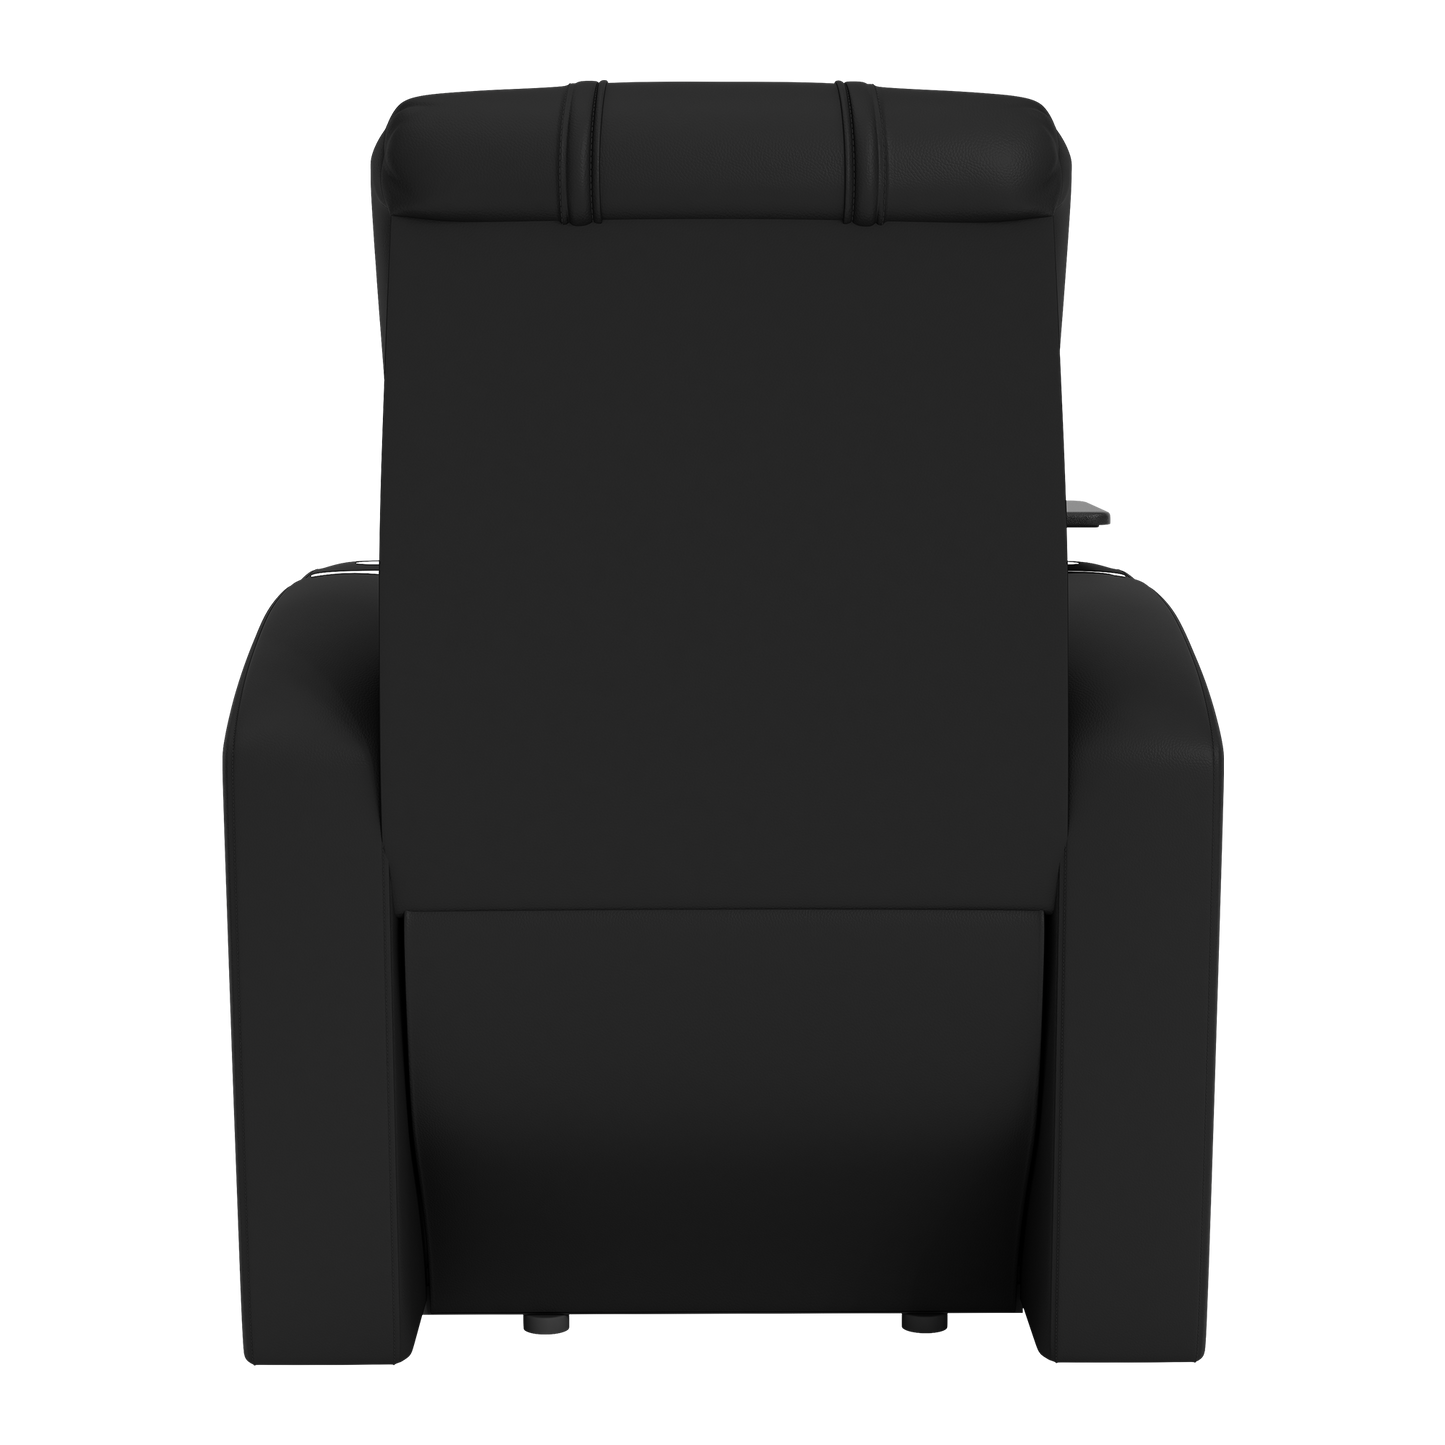 Stealth Power Plus Recliner with Kansas City Royals Secondary